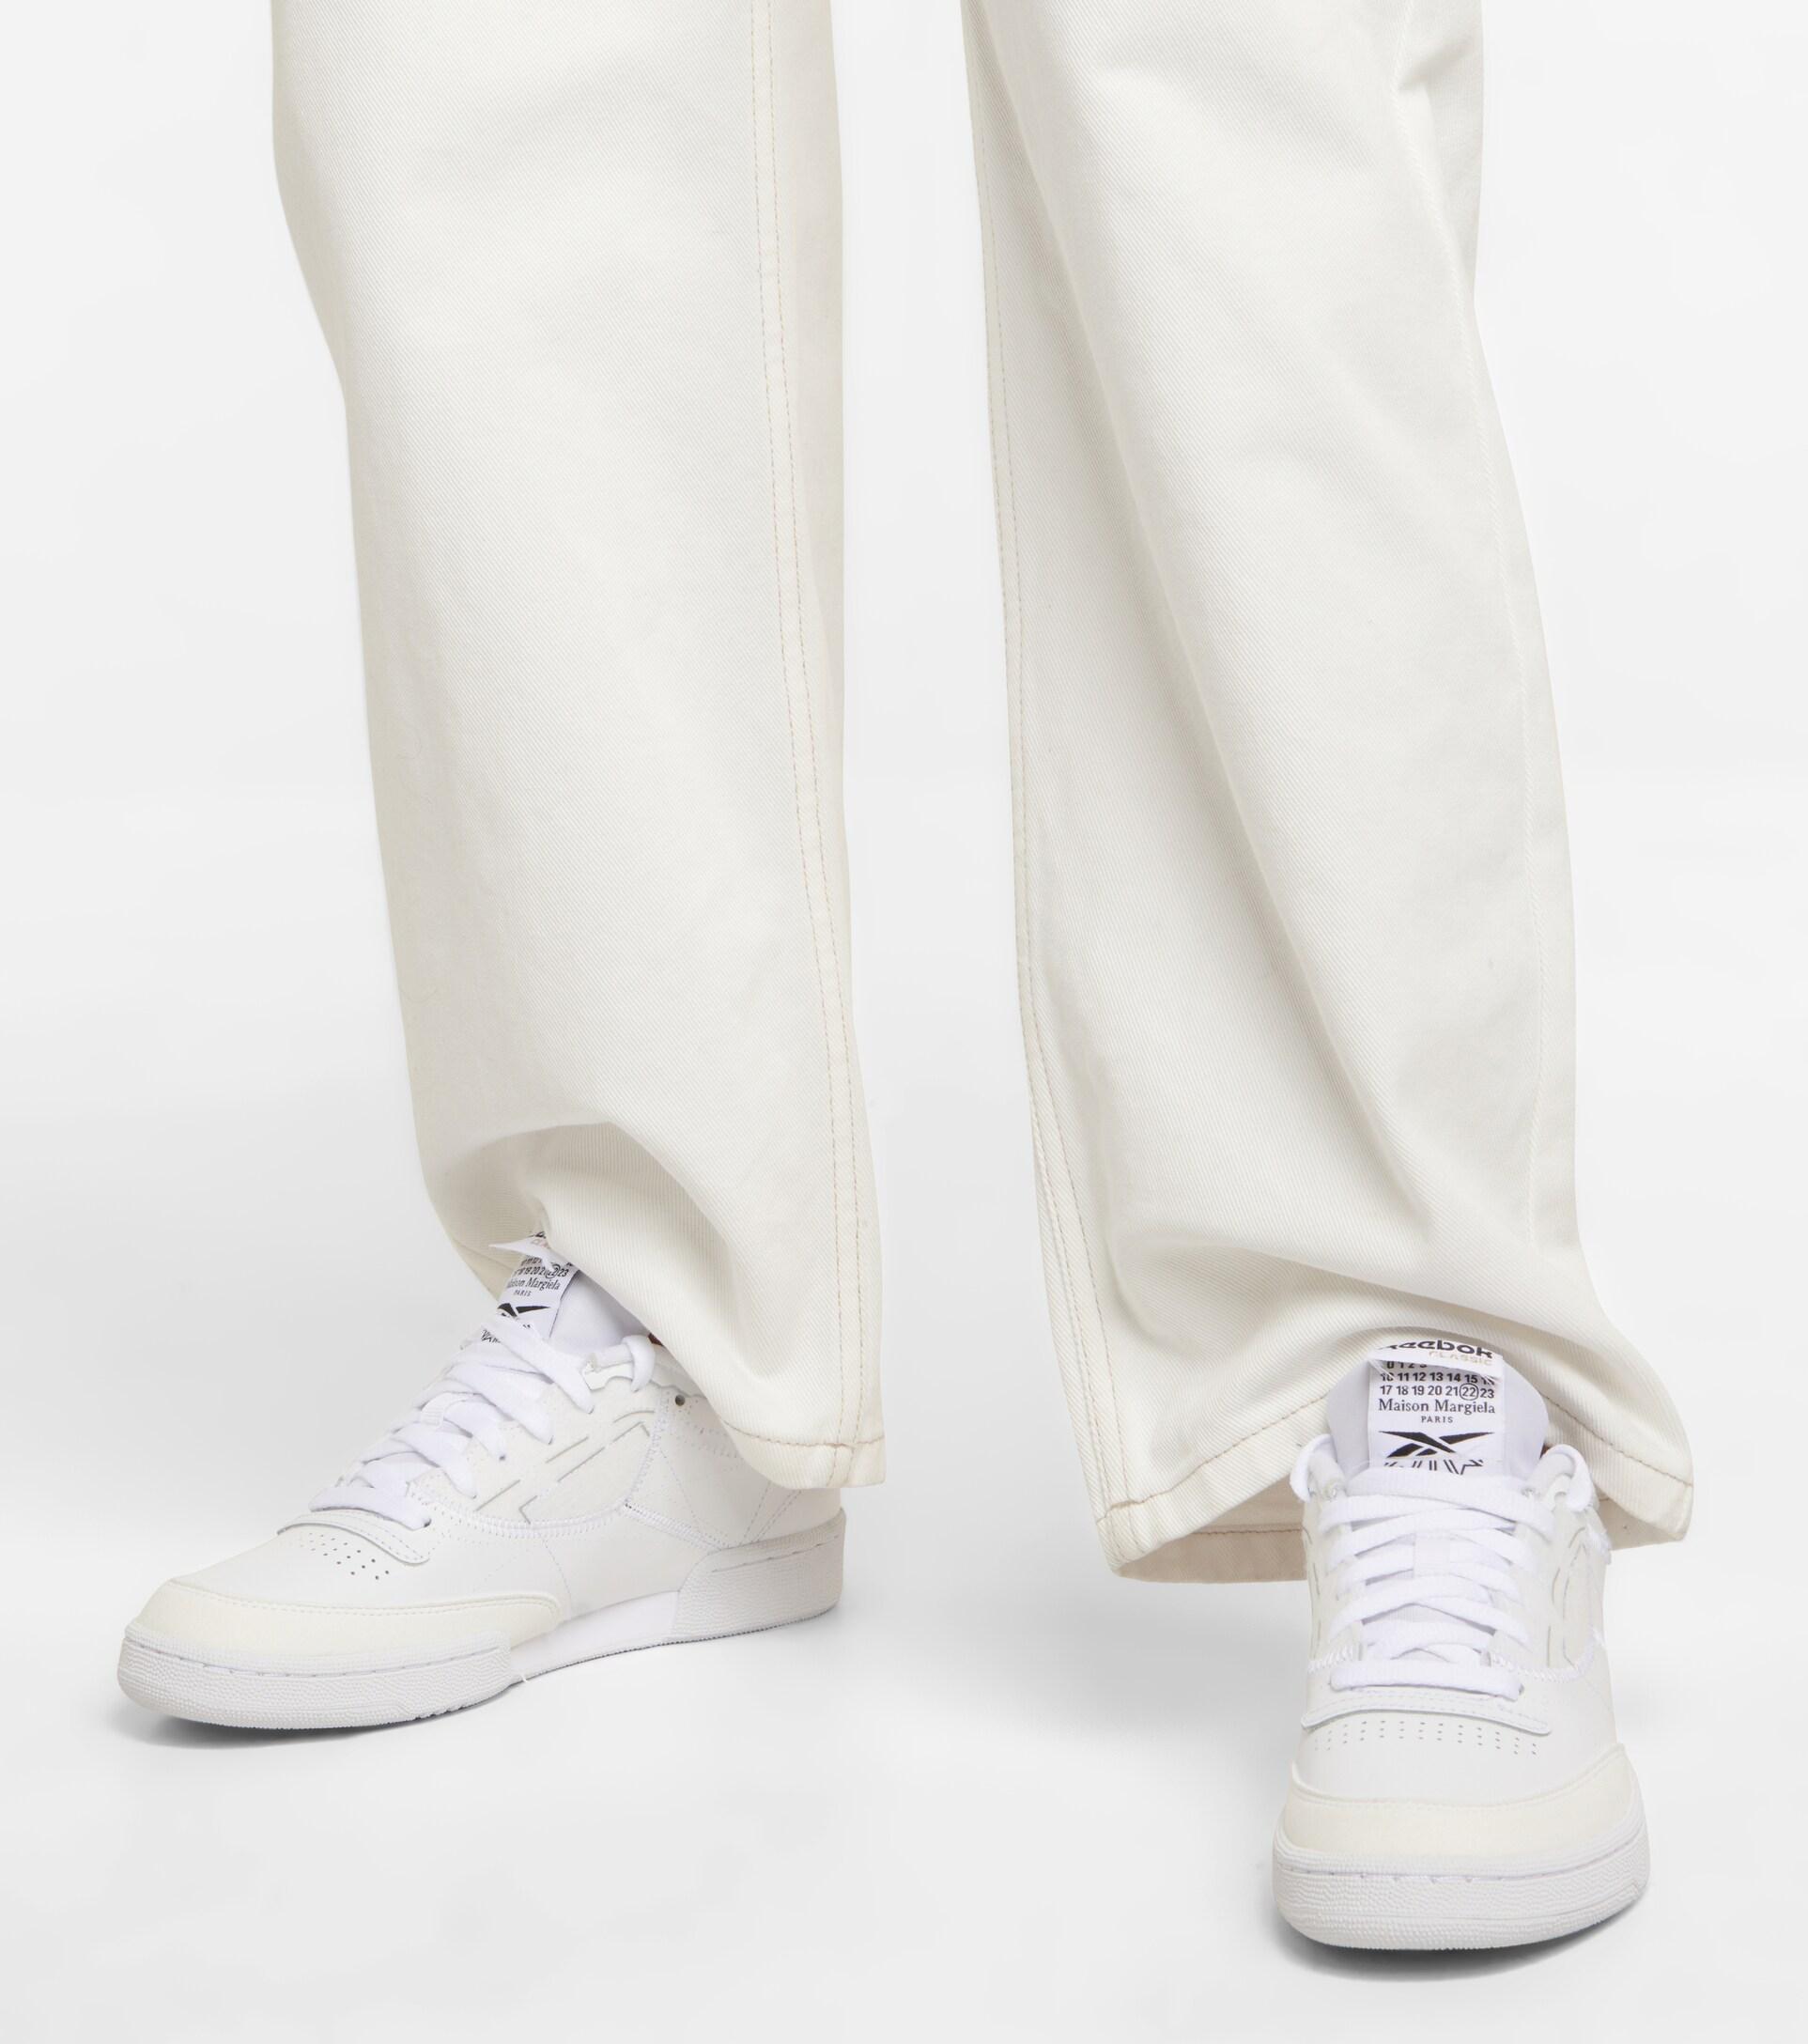 Maison Margiela X Reebok Club C Memory Of Leather Sneakers in White | Lyst